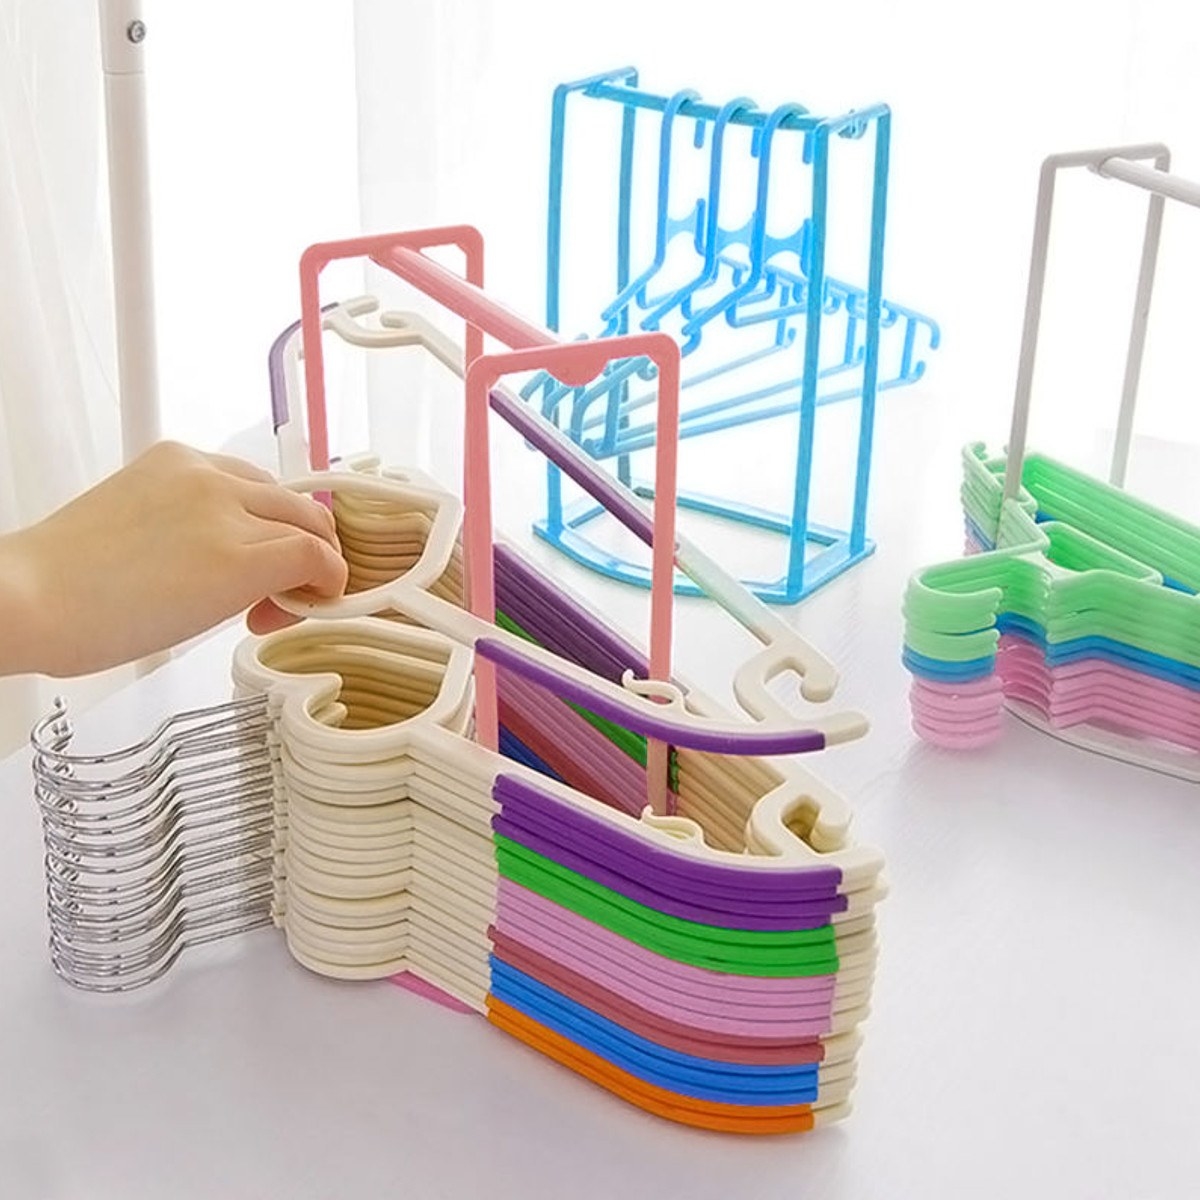 The stacker with hangers stacked on top